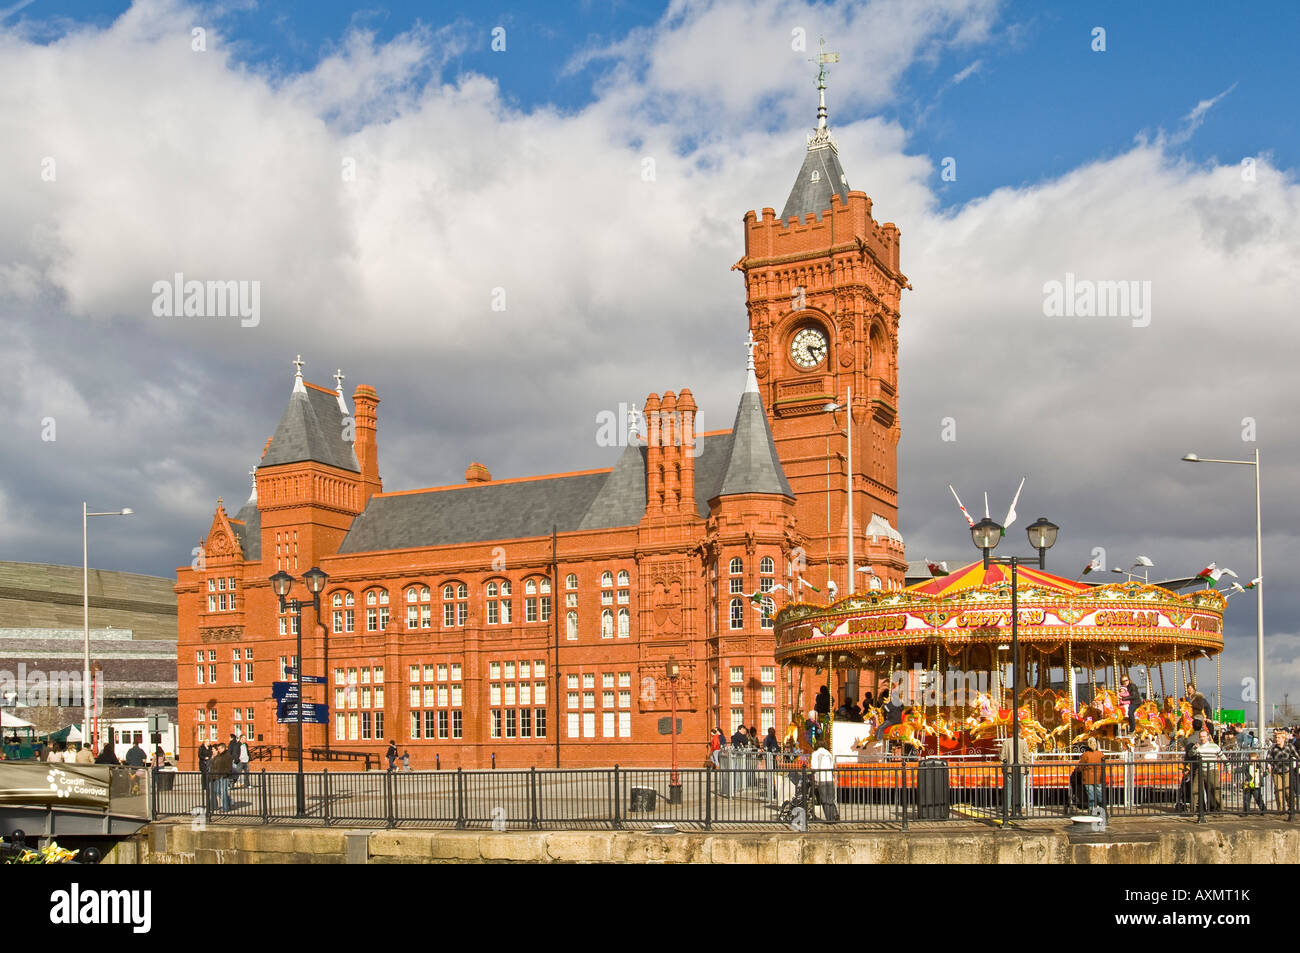 The Pierhead Building, former headquarters of the Bute Dock Company in Cardiff Bay. Stock Photo